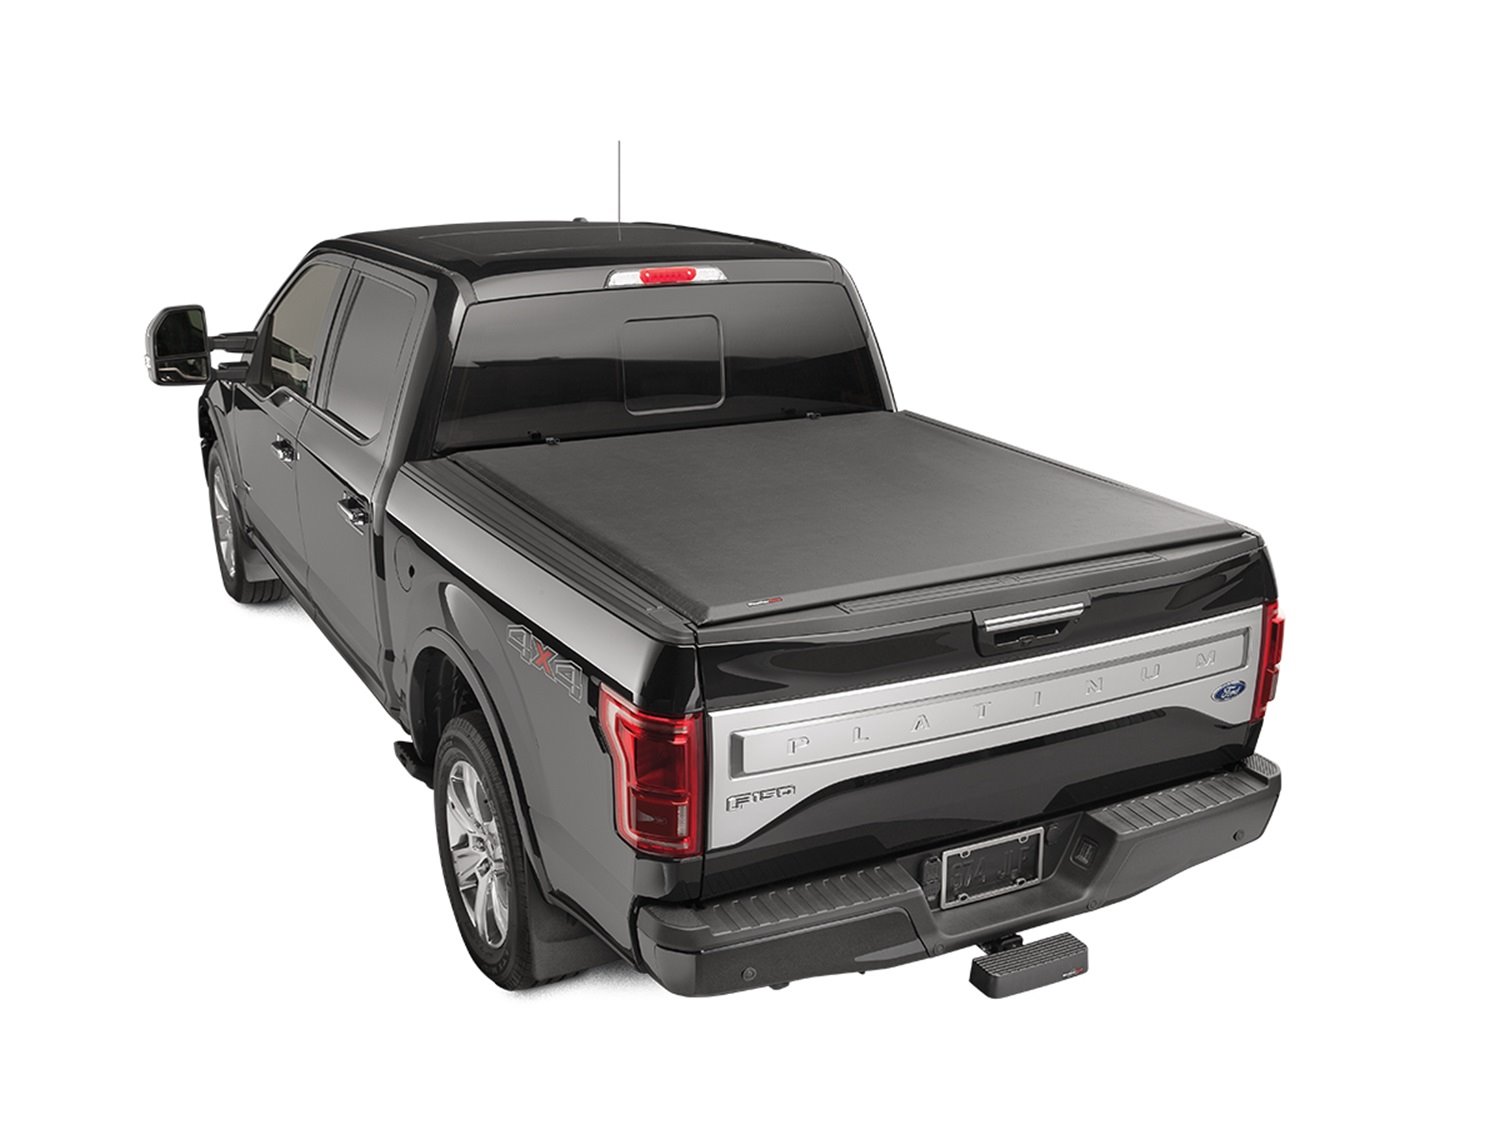 ROLL UP TRUCK BED COVER B FORD F-250/F-350/F-450/F-550 2017 FITS 6 9 BED